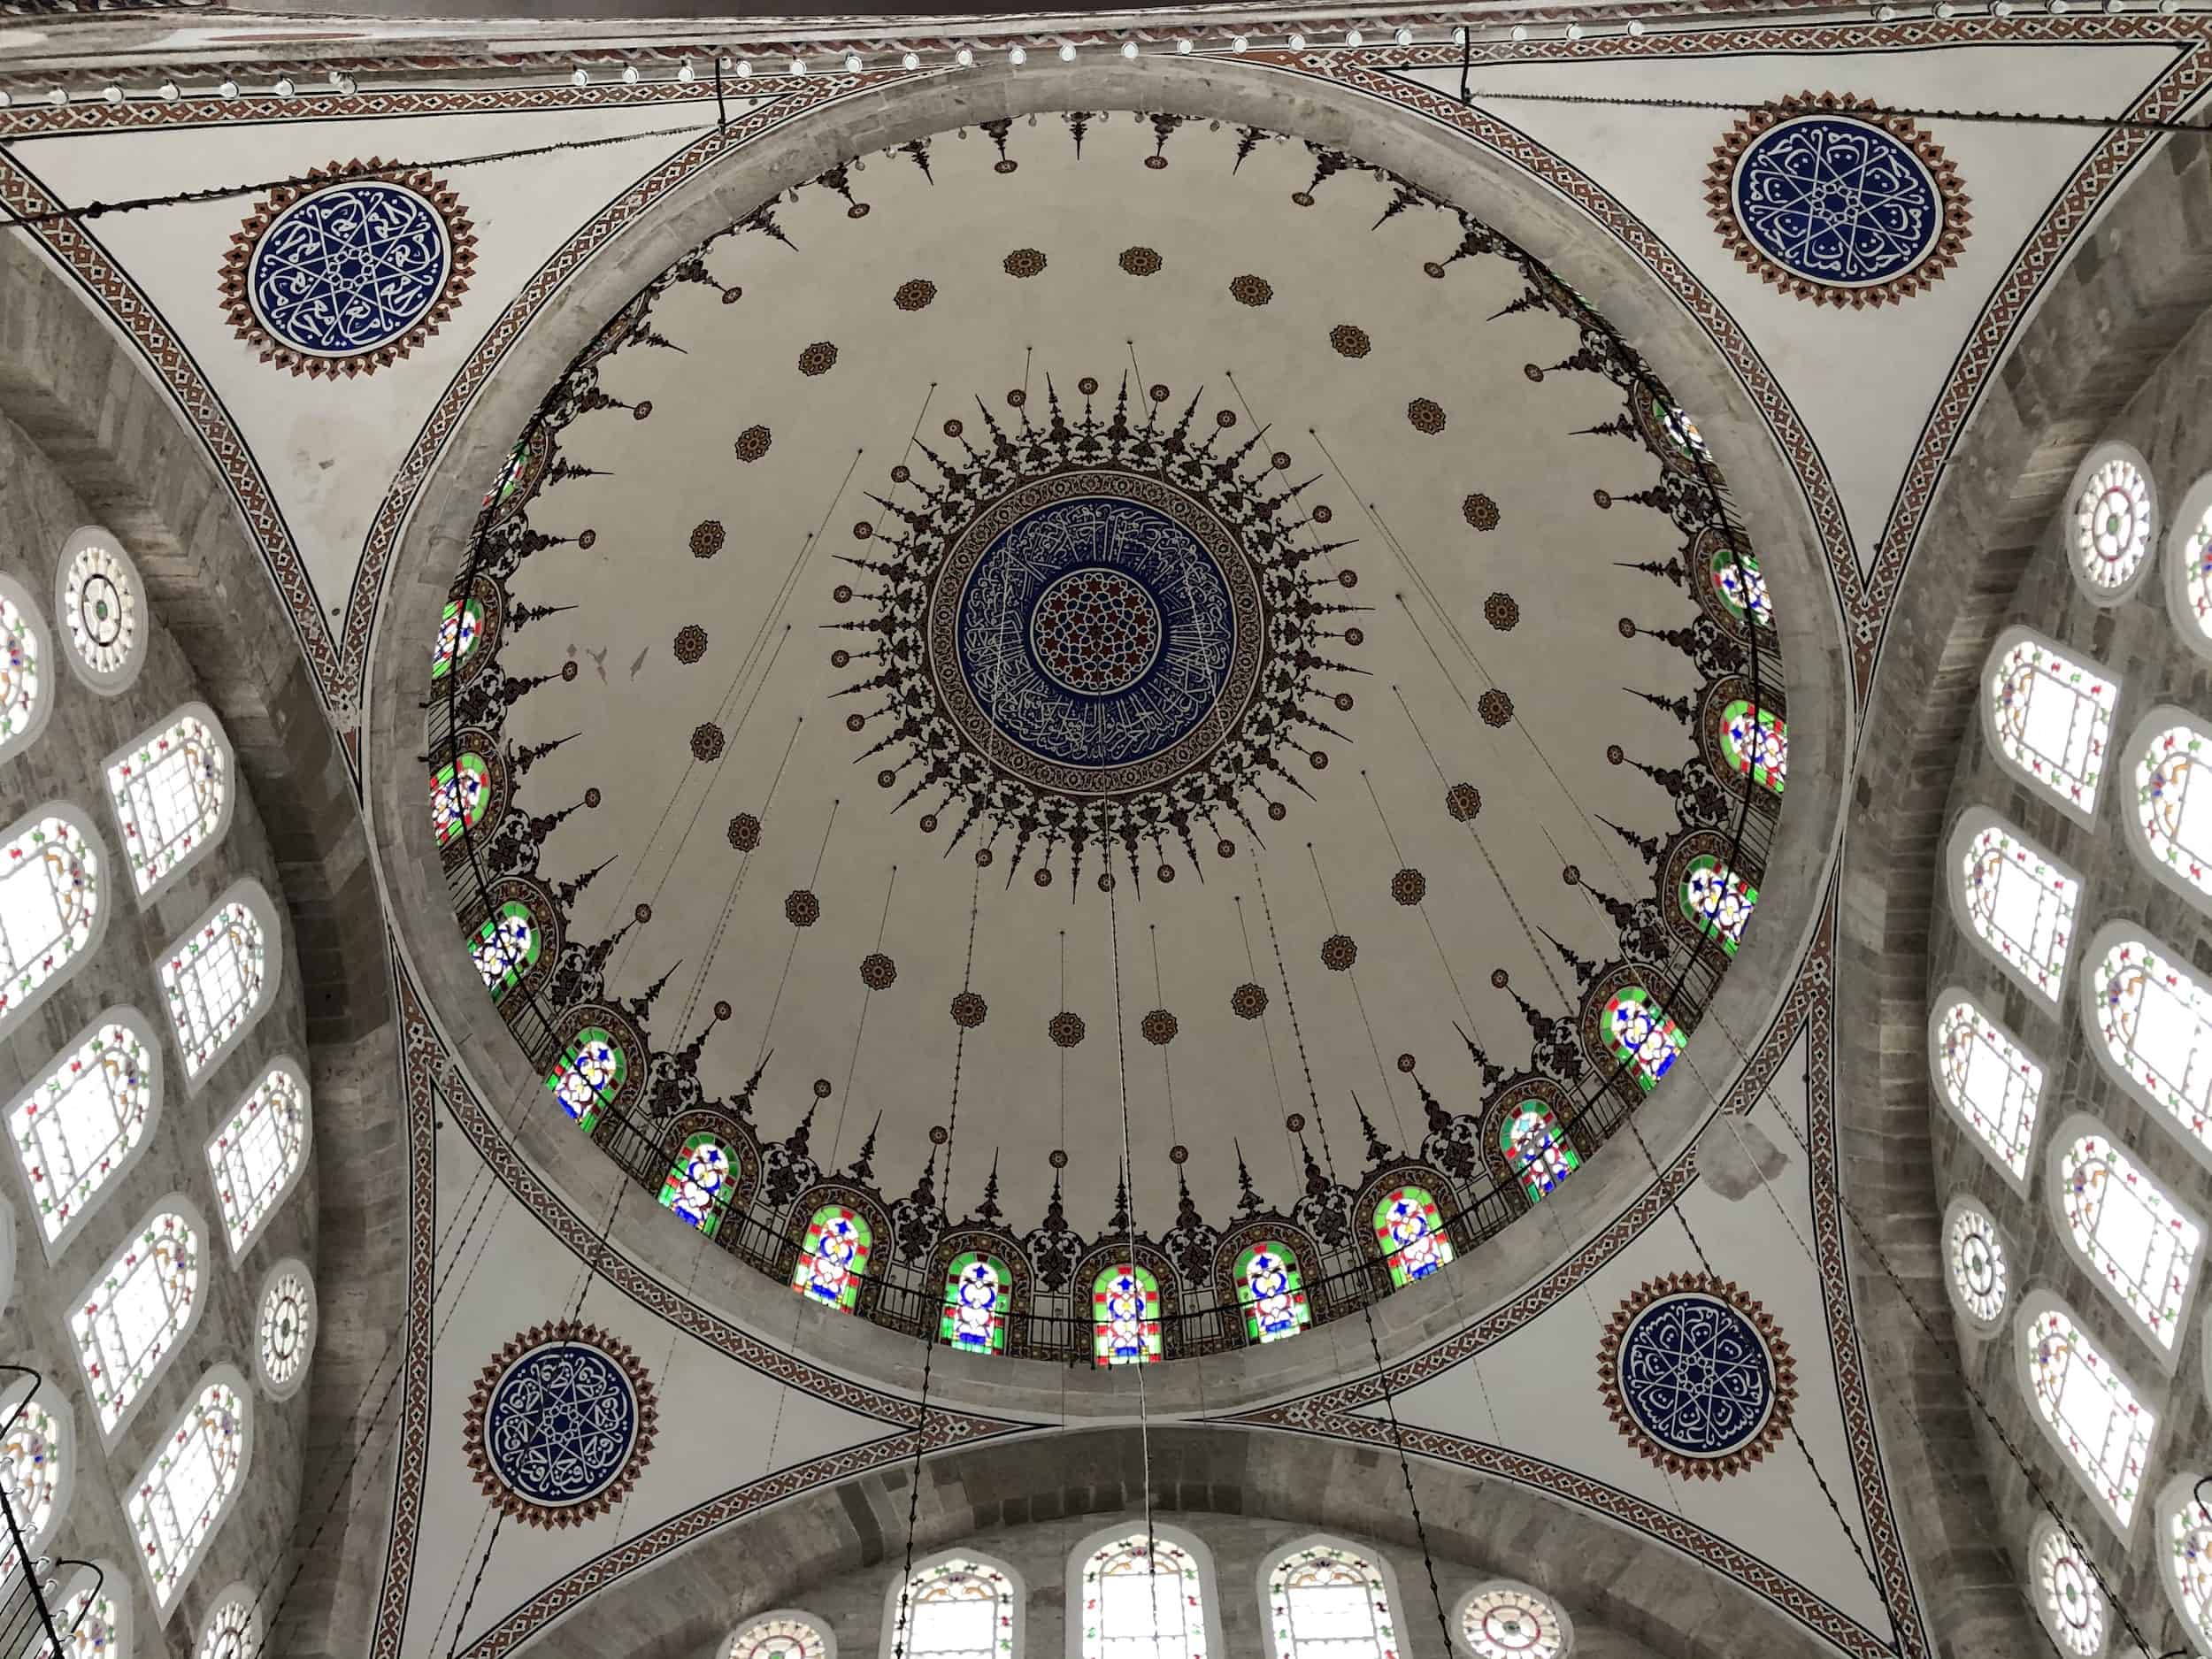 Dome at the Mihrimah Sultan Mosque in Edirnekapı, Istanbul, Turkey